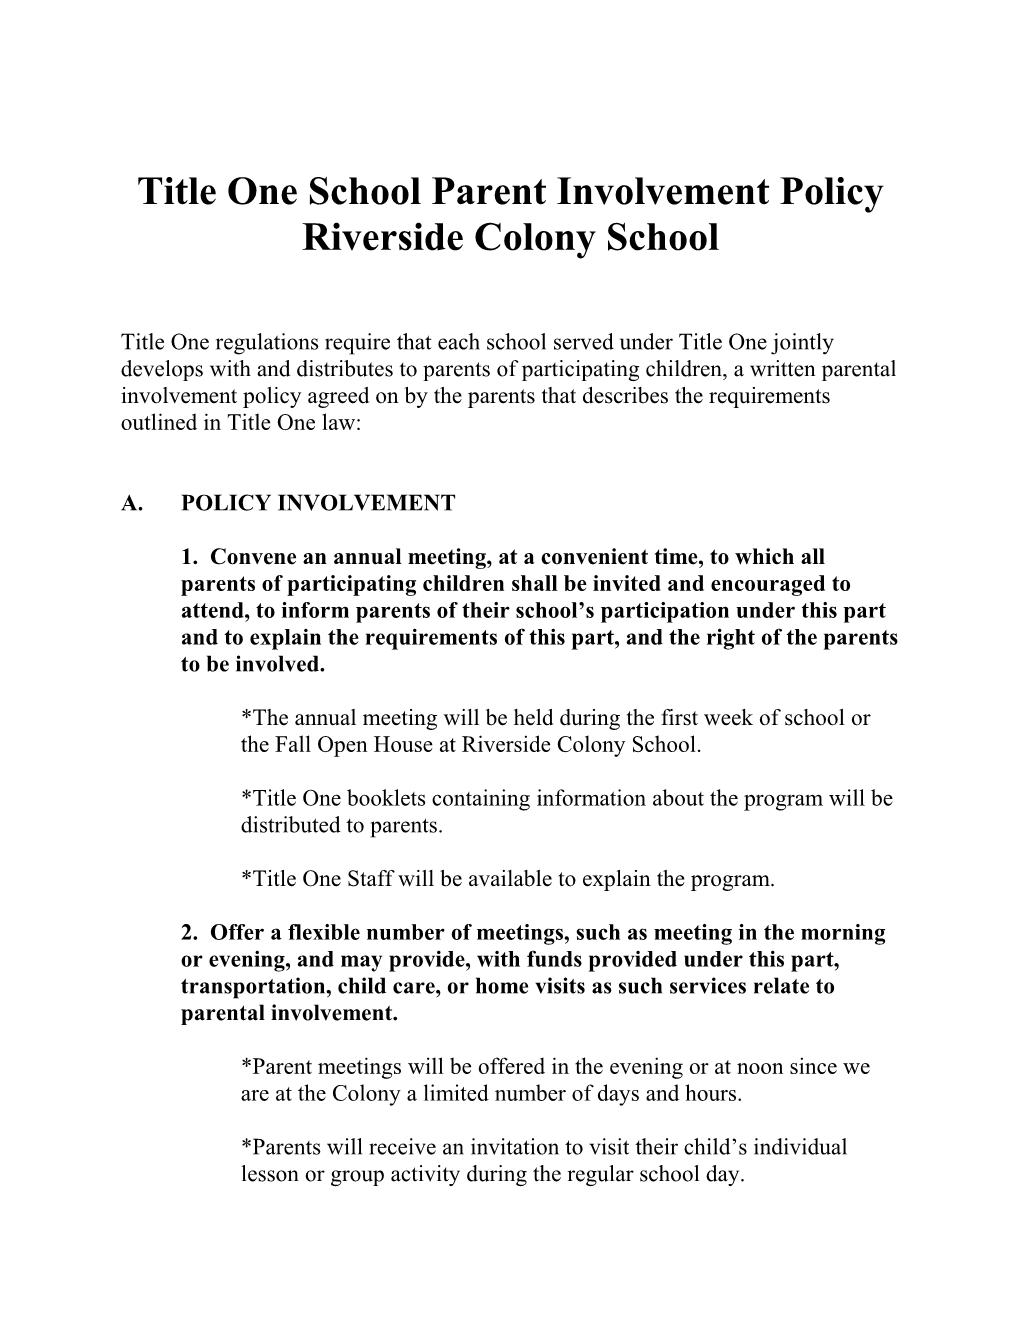 Title One School Parental Involvement Policy